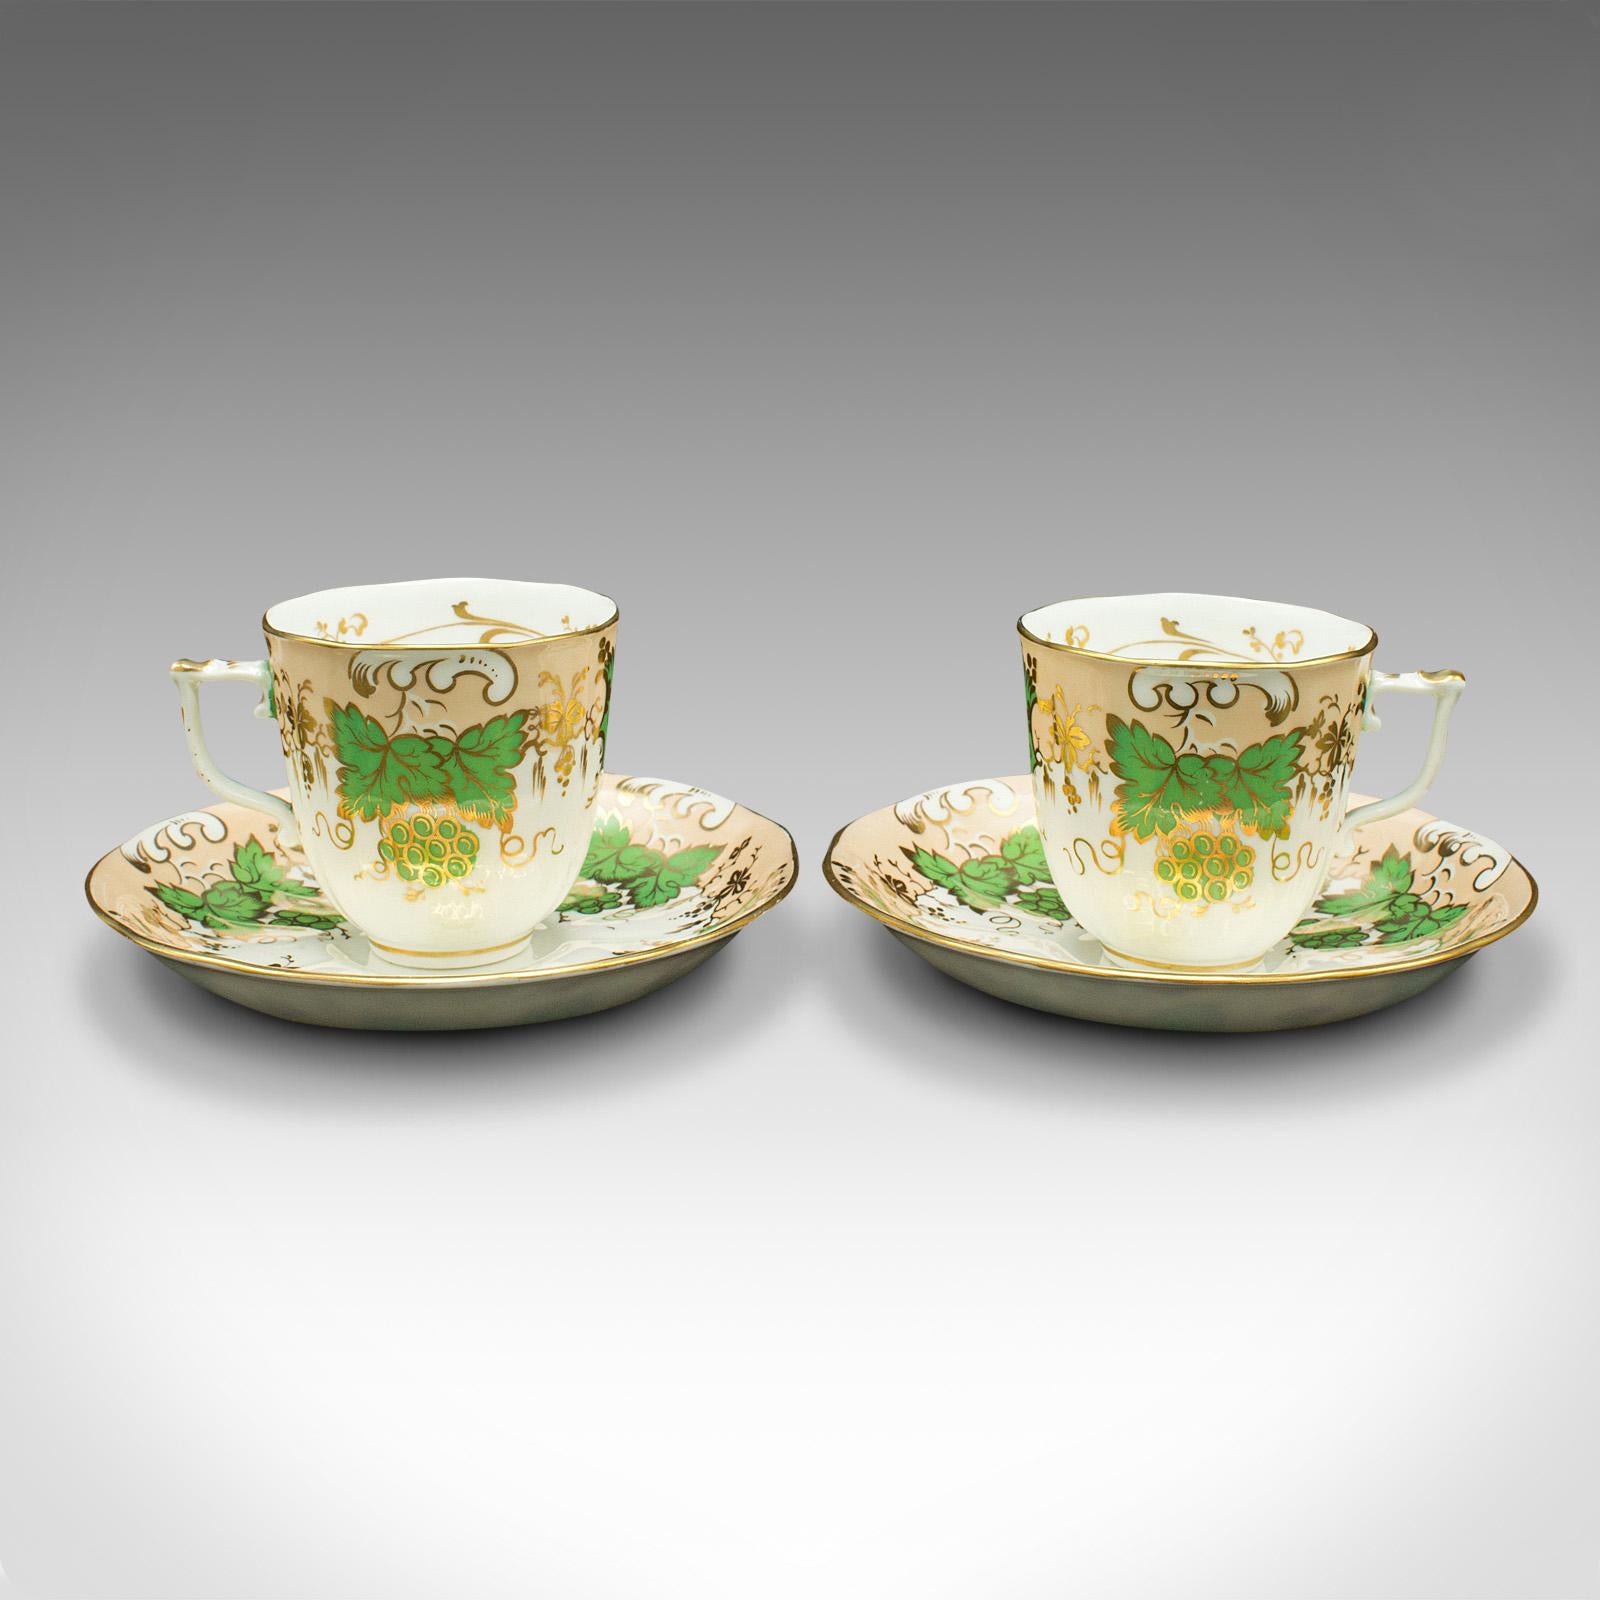 This is a set of 4 antique coffee cups. An English, bone China decorative drinking can and saucer with green grape pattern, dating to the Victorian period, circa 1850.

Beautifully decorated and with a pleasingly tactile feel in the hand
Displays